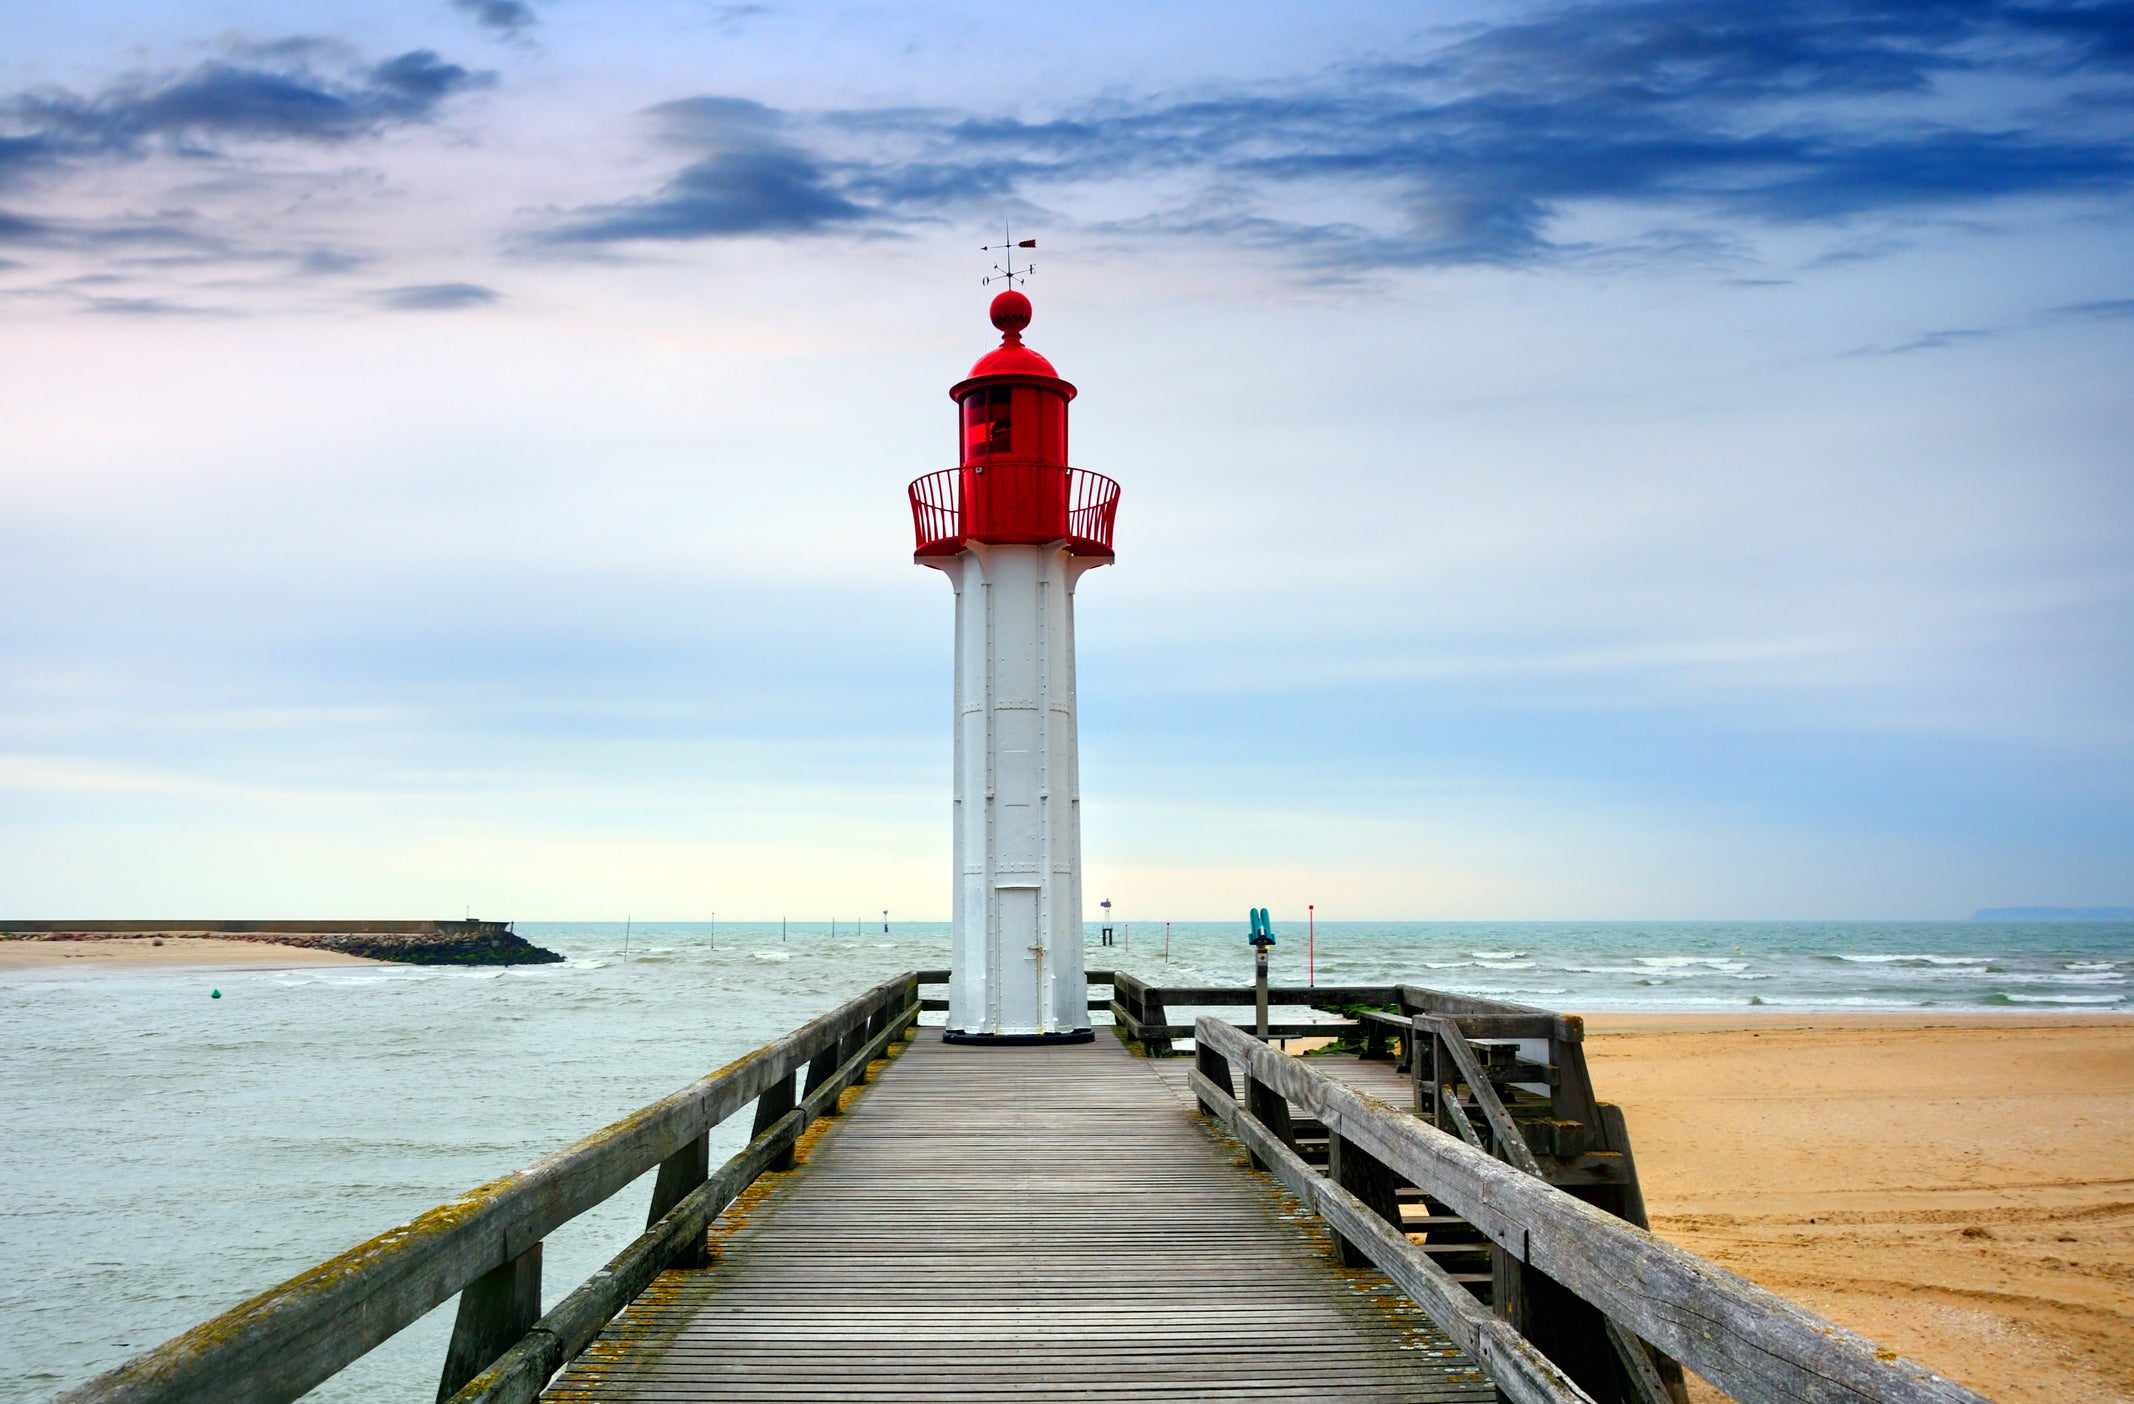 The Lighthouse in Trouville-sur-Mer harbour is a picturesque sight in Normandy